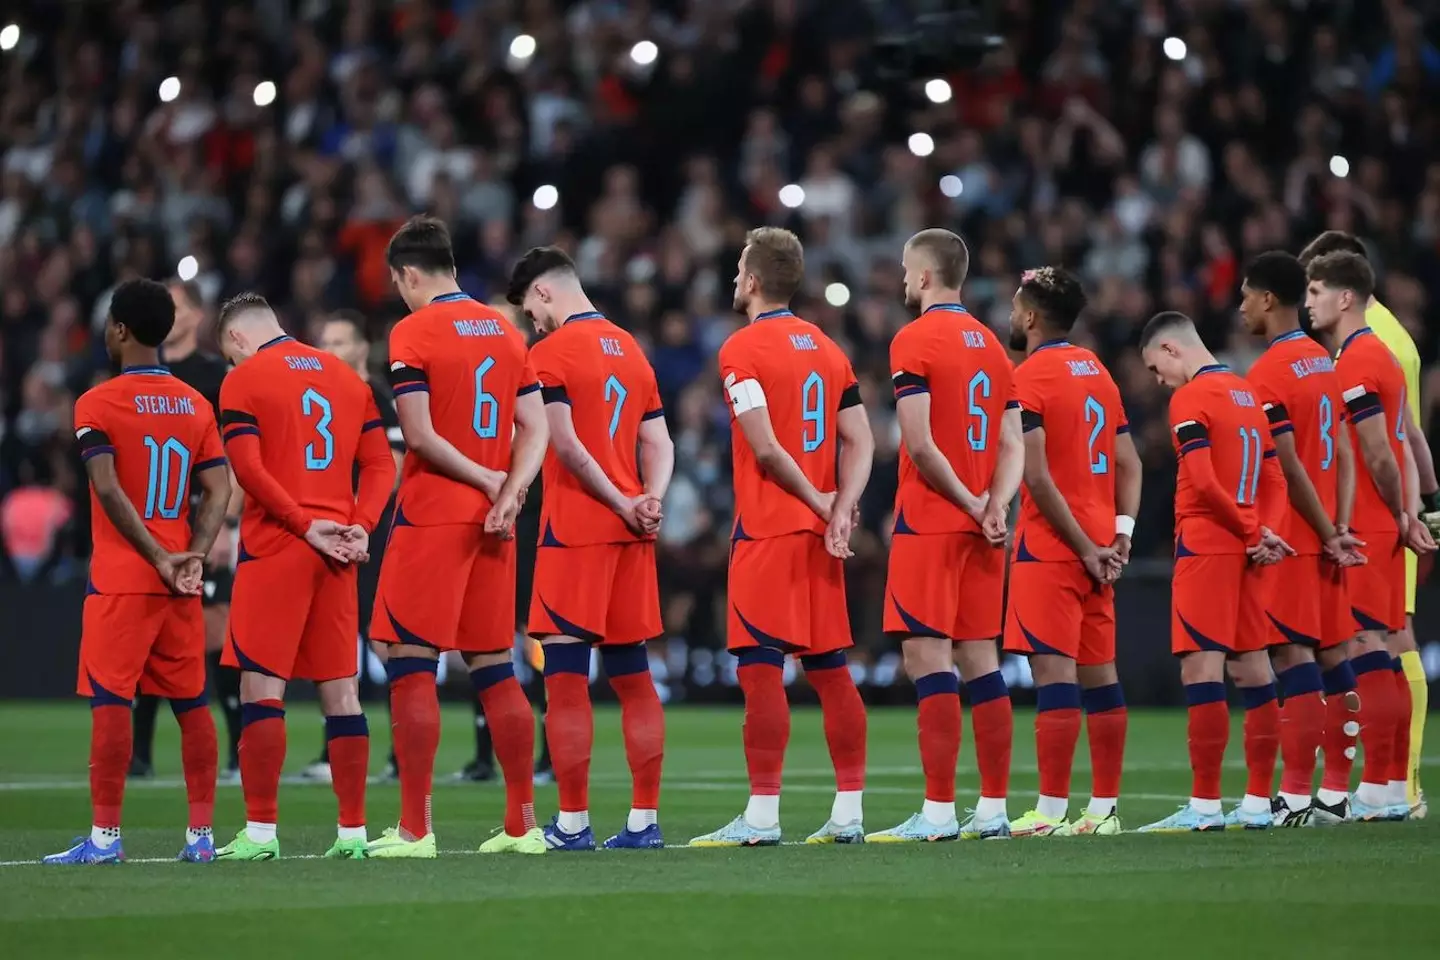 A minute's silence for Queen Elizabeth II during the UEFA Nations League match between England and Germany at Wembley Stadium.